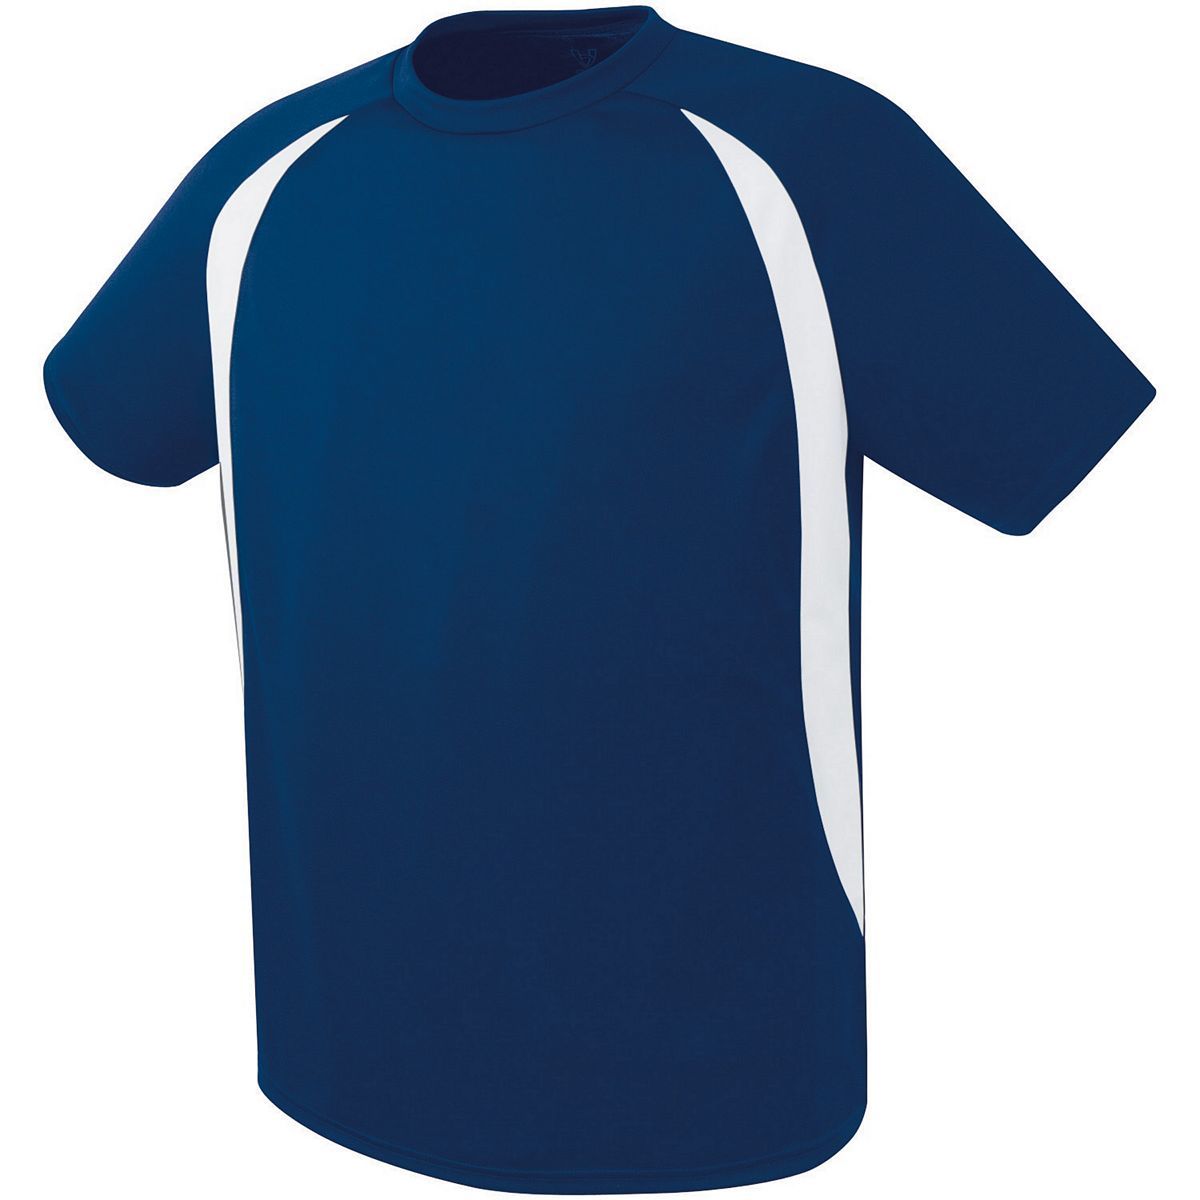 High 5 Liberty  Soccer Jersey in Navy/White  -Part of the Adult, Adult-Jersey, High5-Products, Soccer, Shirts, All-Sports-1 product lines at KanaleyCreations.com